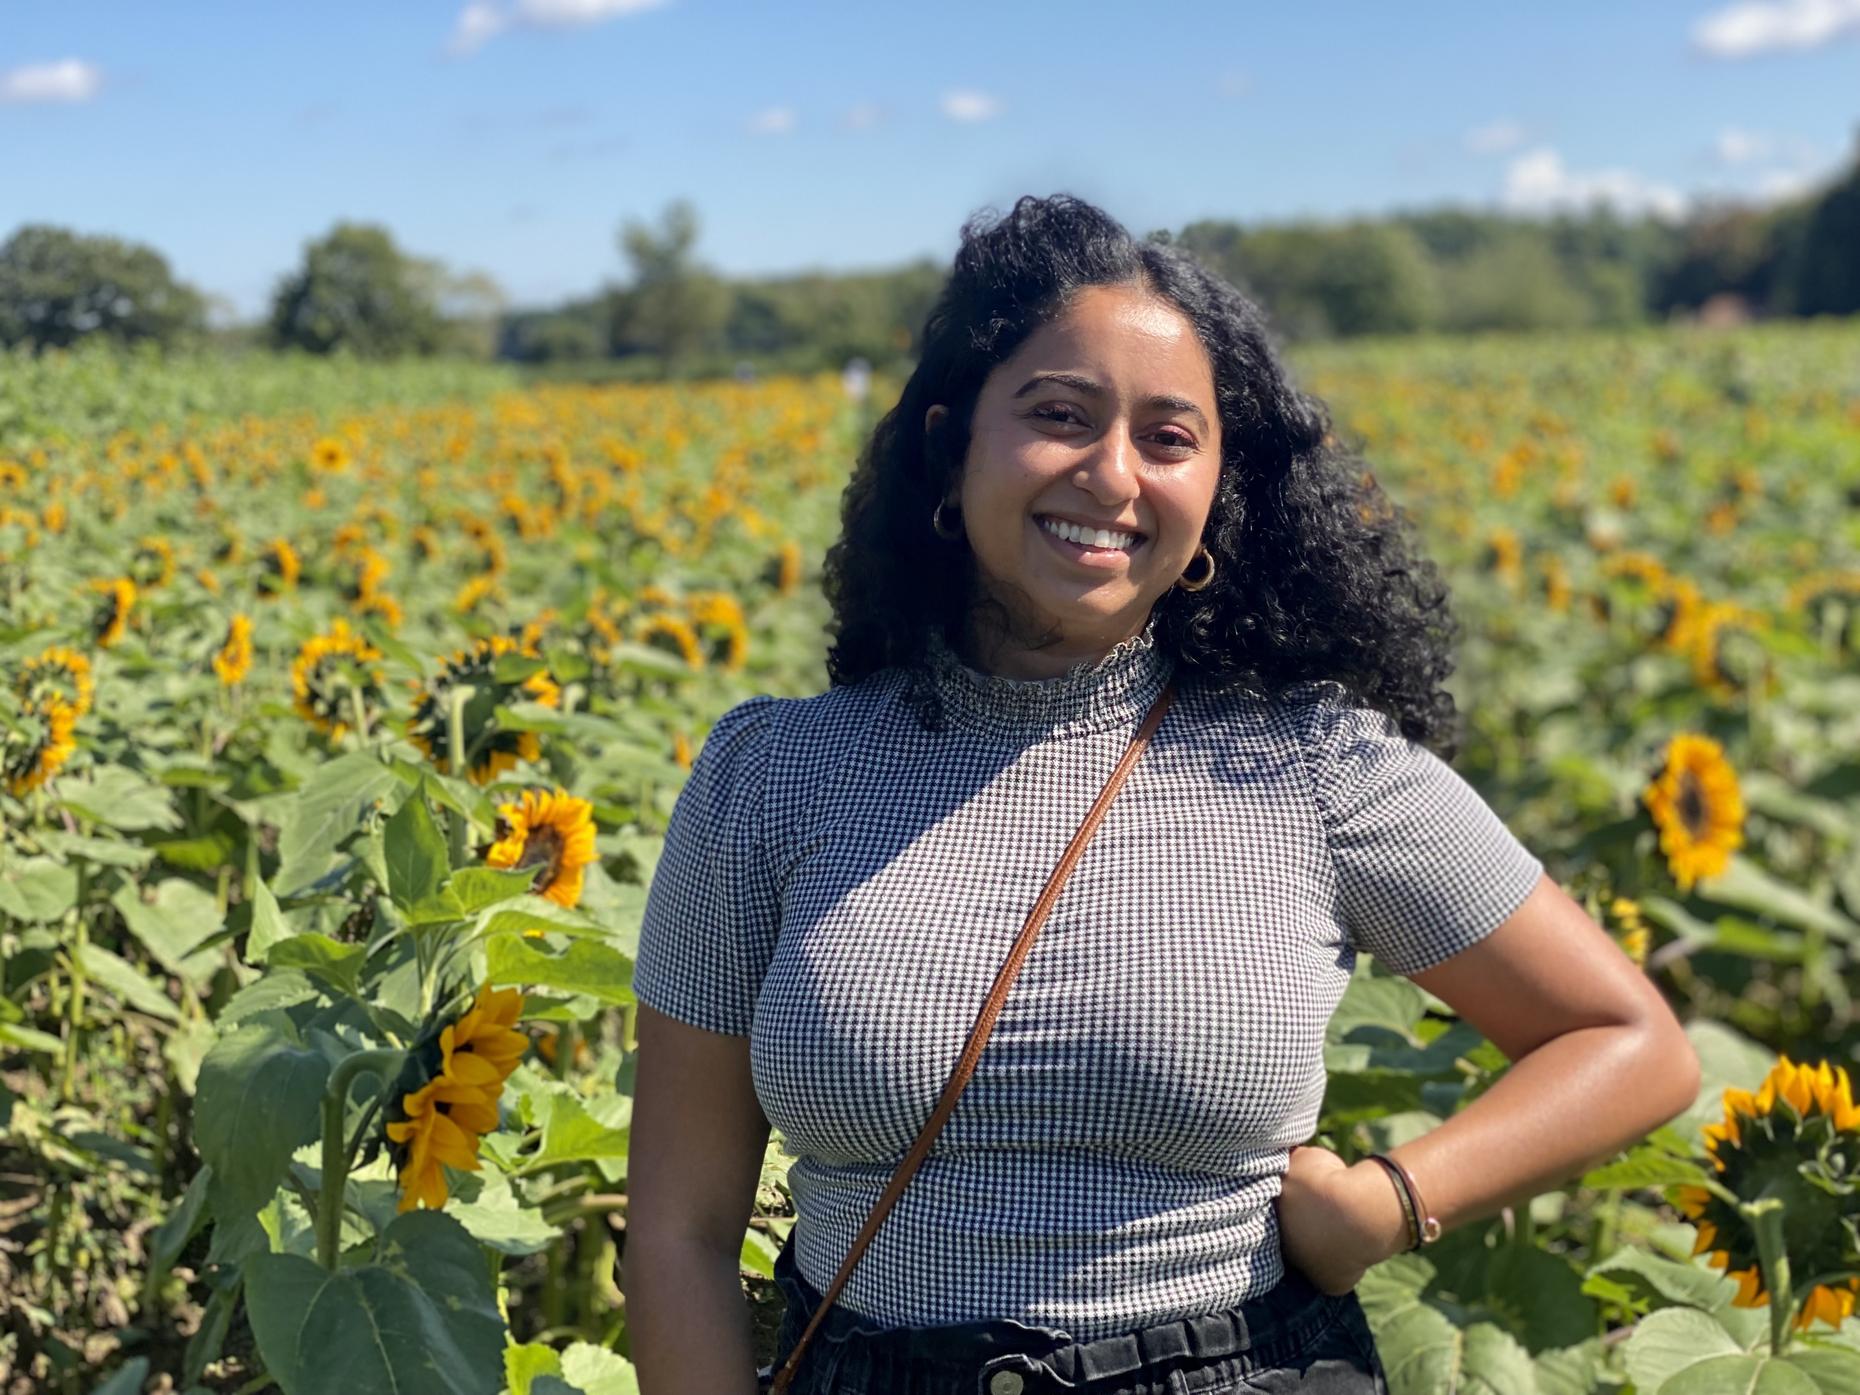 Producer Sarah Qari, smiling and standing proudly in the foreground of a field of sunflowers.